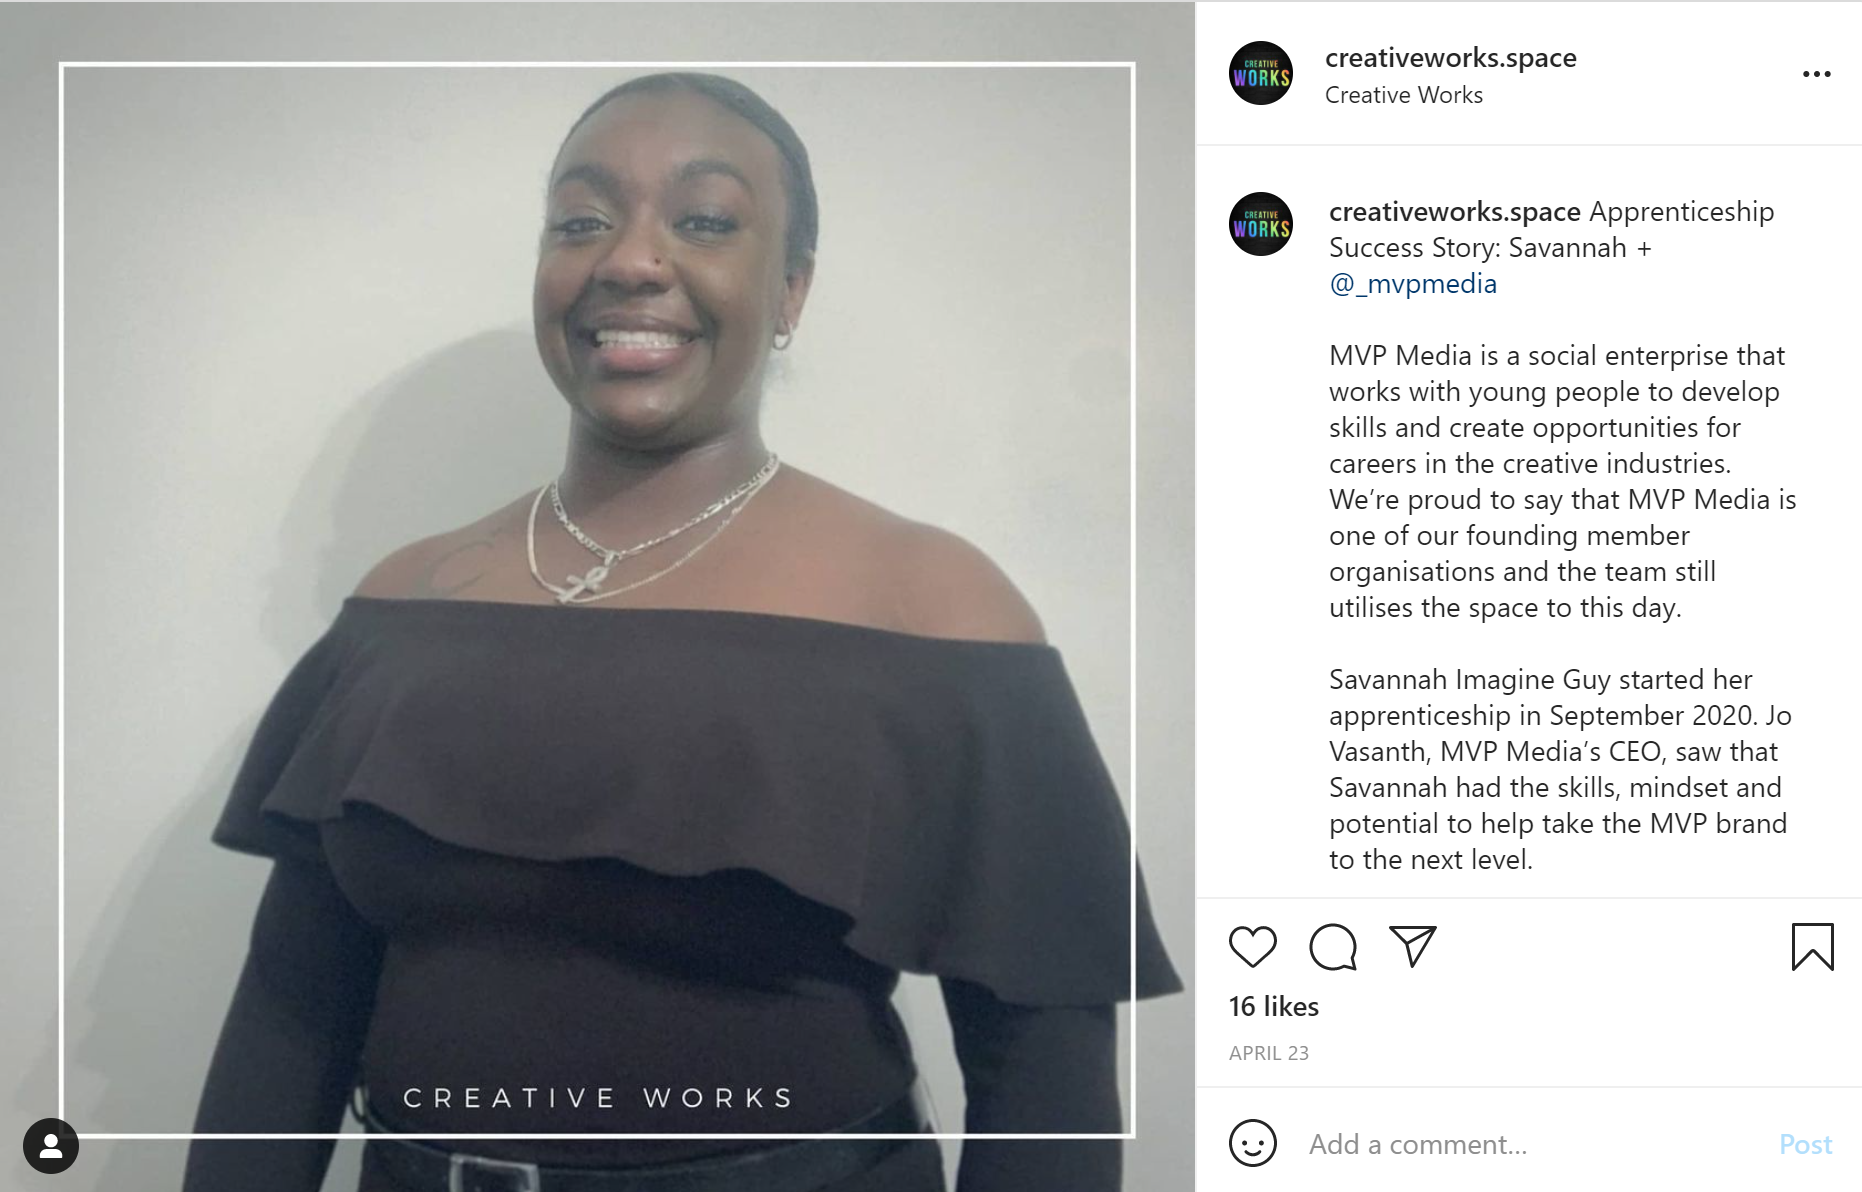 Creative Works Instagram page